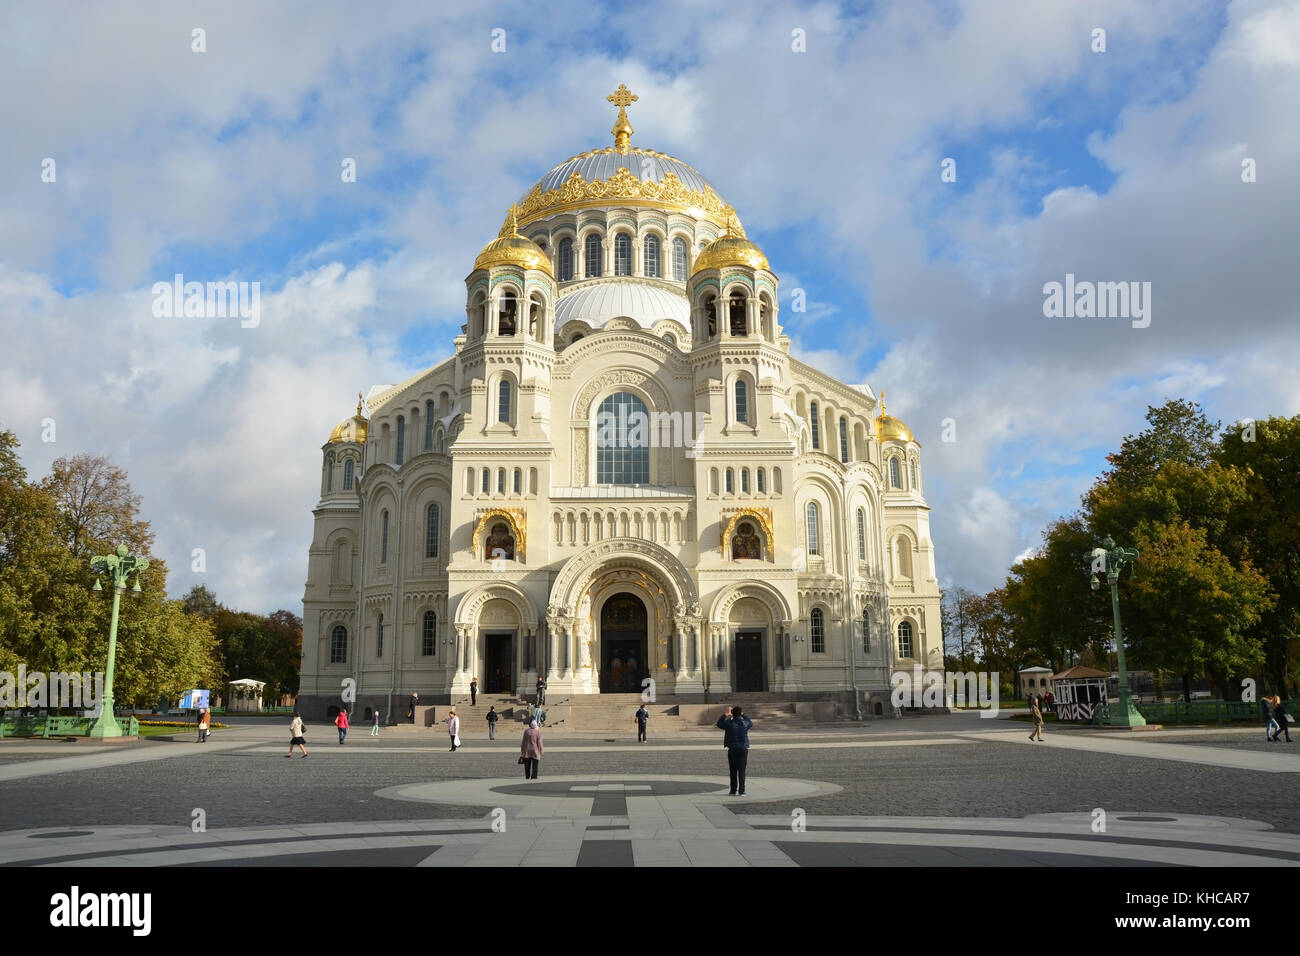 Orthodox cathedral of St. Nicholas in town Kronshtadt, Russia. Second name of cathedral is 'Sea cathedral' Stock Photo